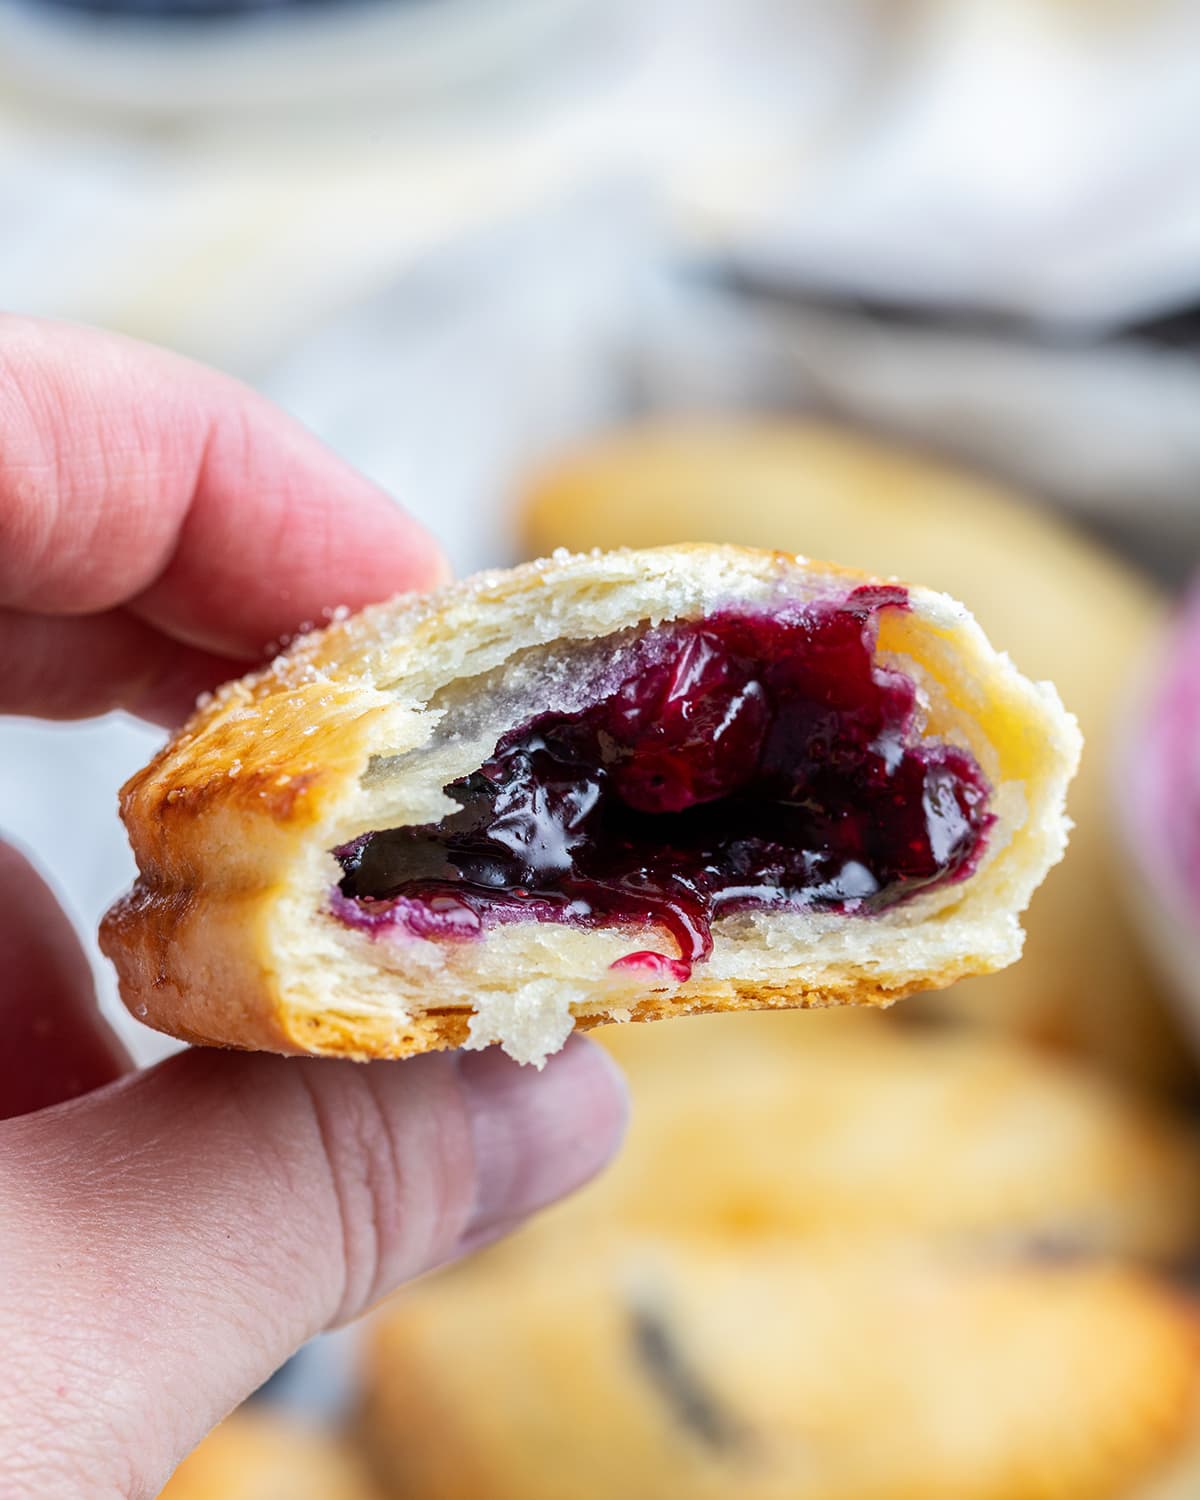 A hand holding a blueberry hand pie with a bite out of it, showing the blueberry filling.